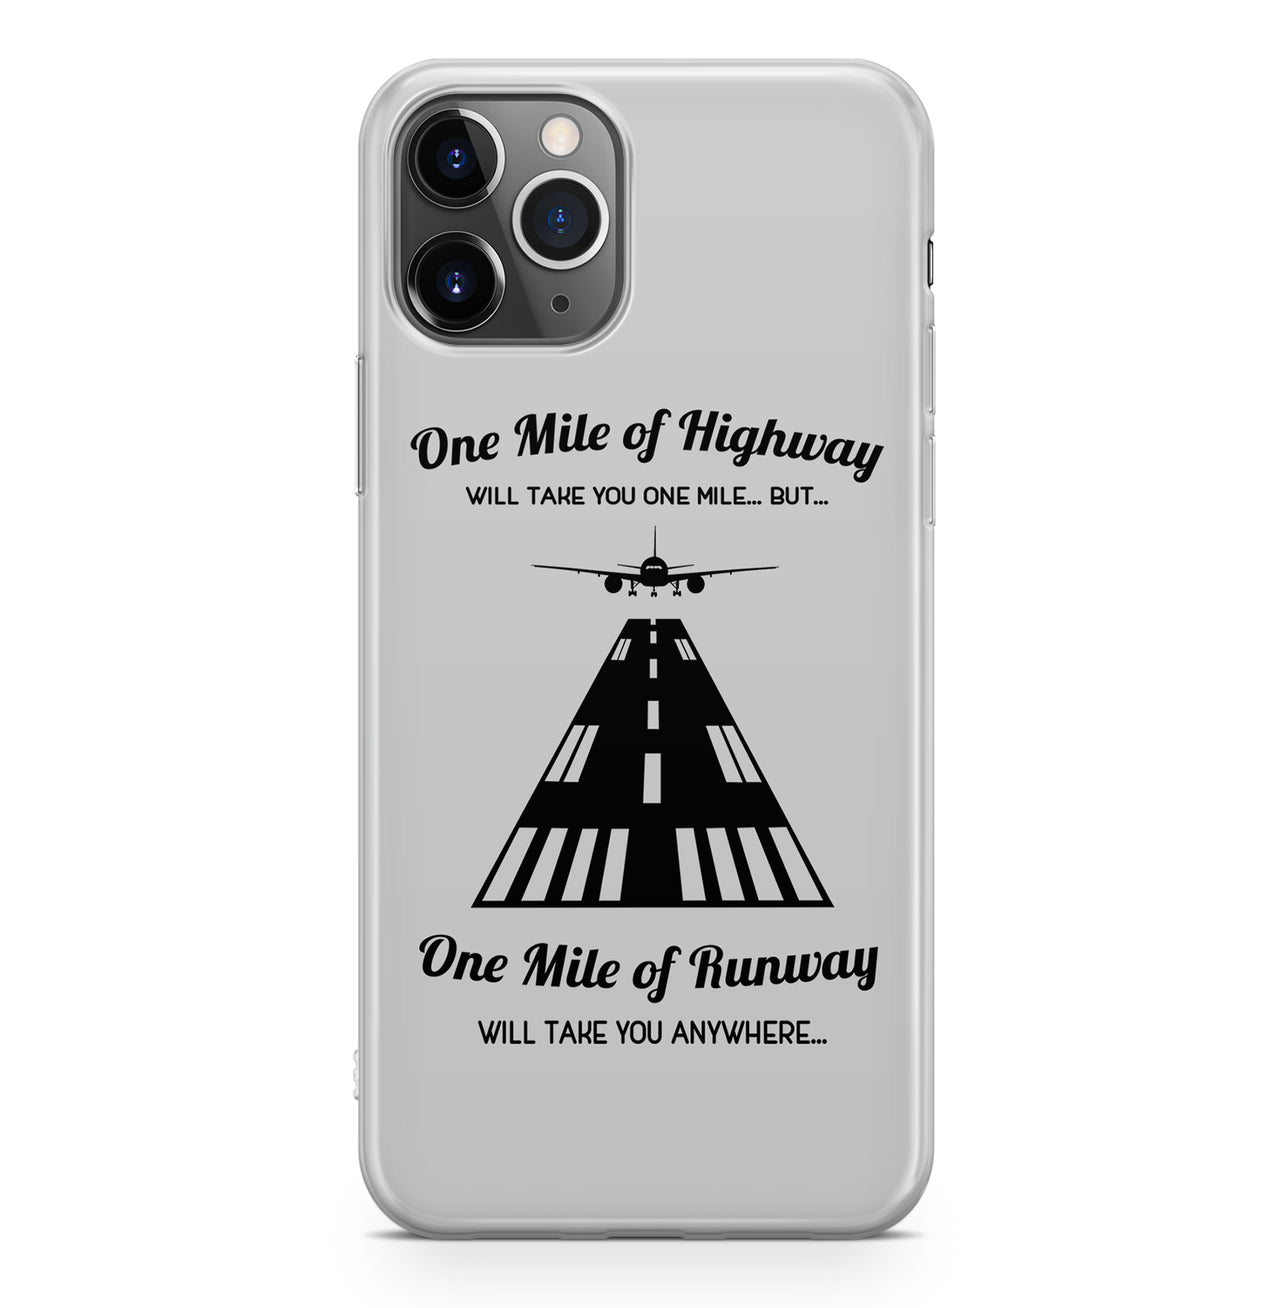 One Mile of Runway Will Take you Anywhere Designed iPhone Cases